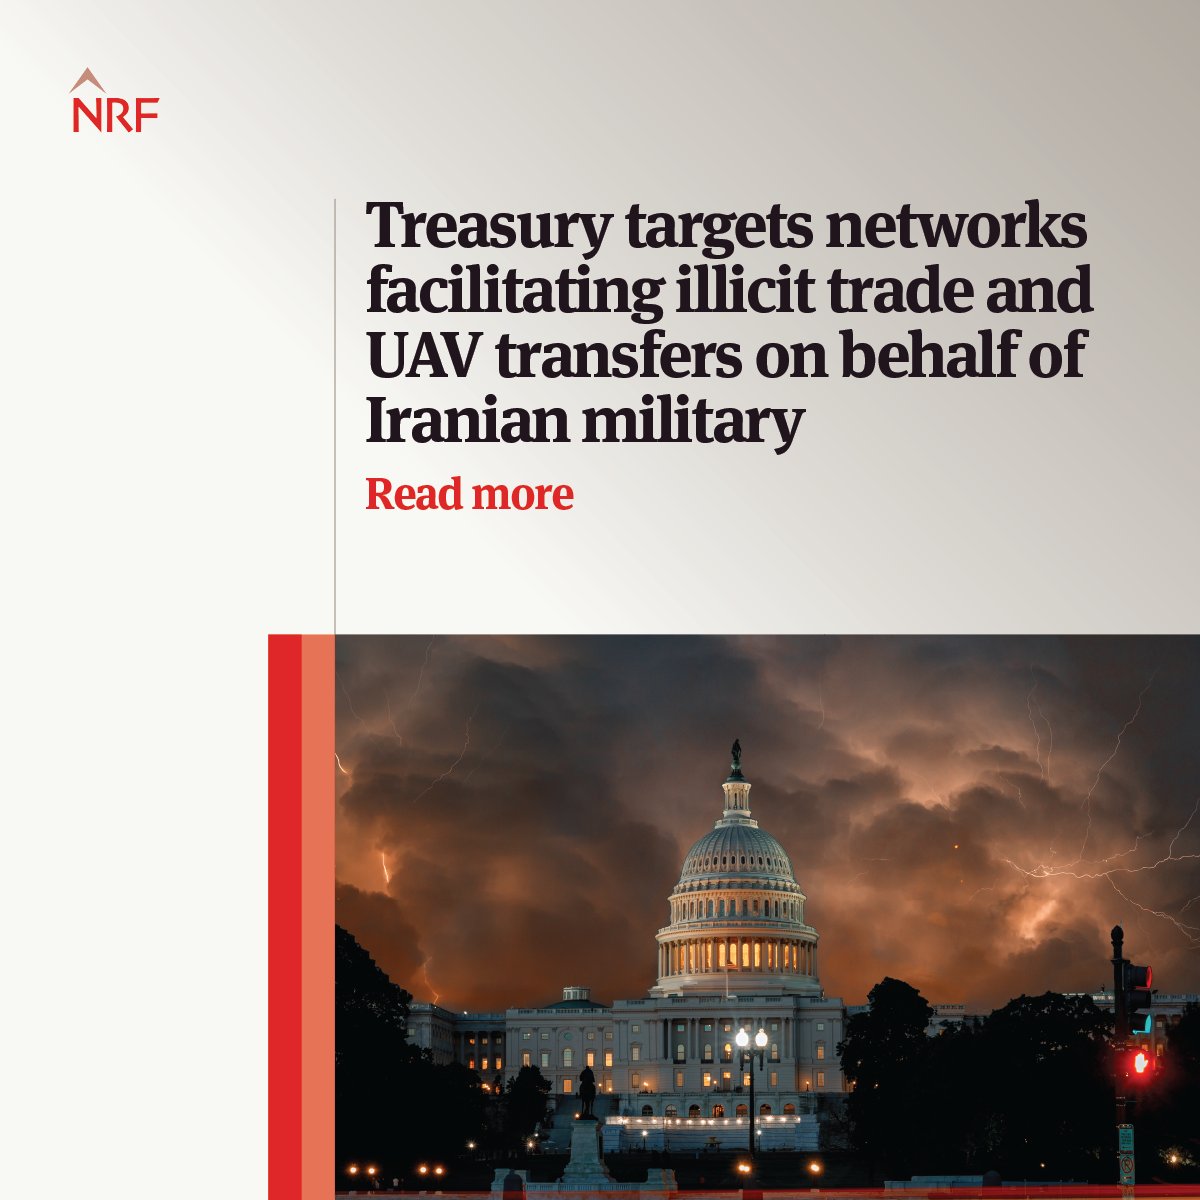 Kim Caine, Utsav Mathur, Cat McManus and Mikkaela Salamatin review the implications and impact of the recent Treasury Department sanctions targeting networks involved in financing and facilitating the secret sale of UAVs on behalf of the Iranian military. ow.ly/3FZJ50Rwg4o